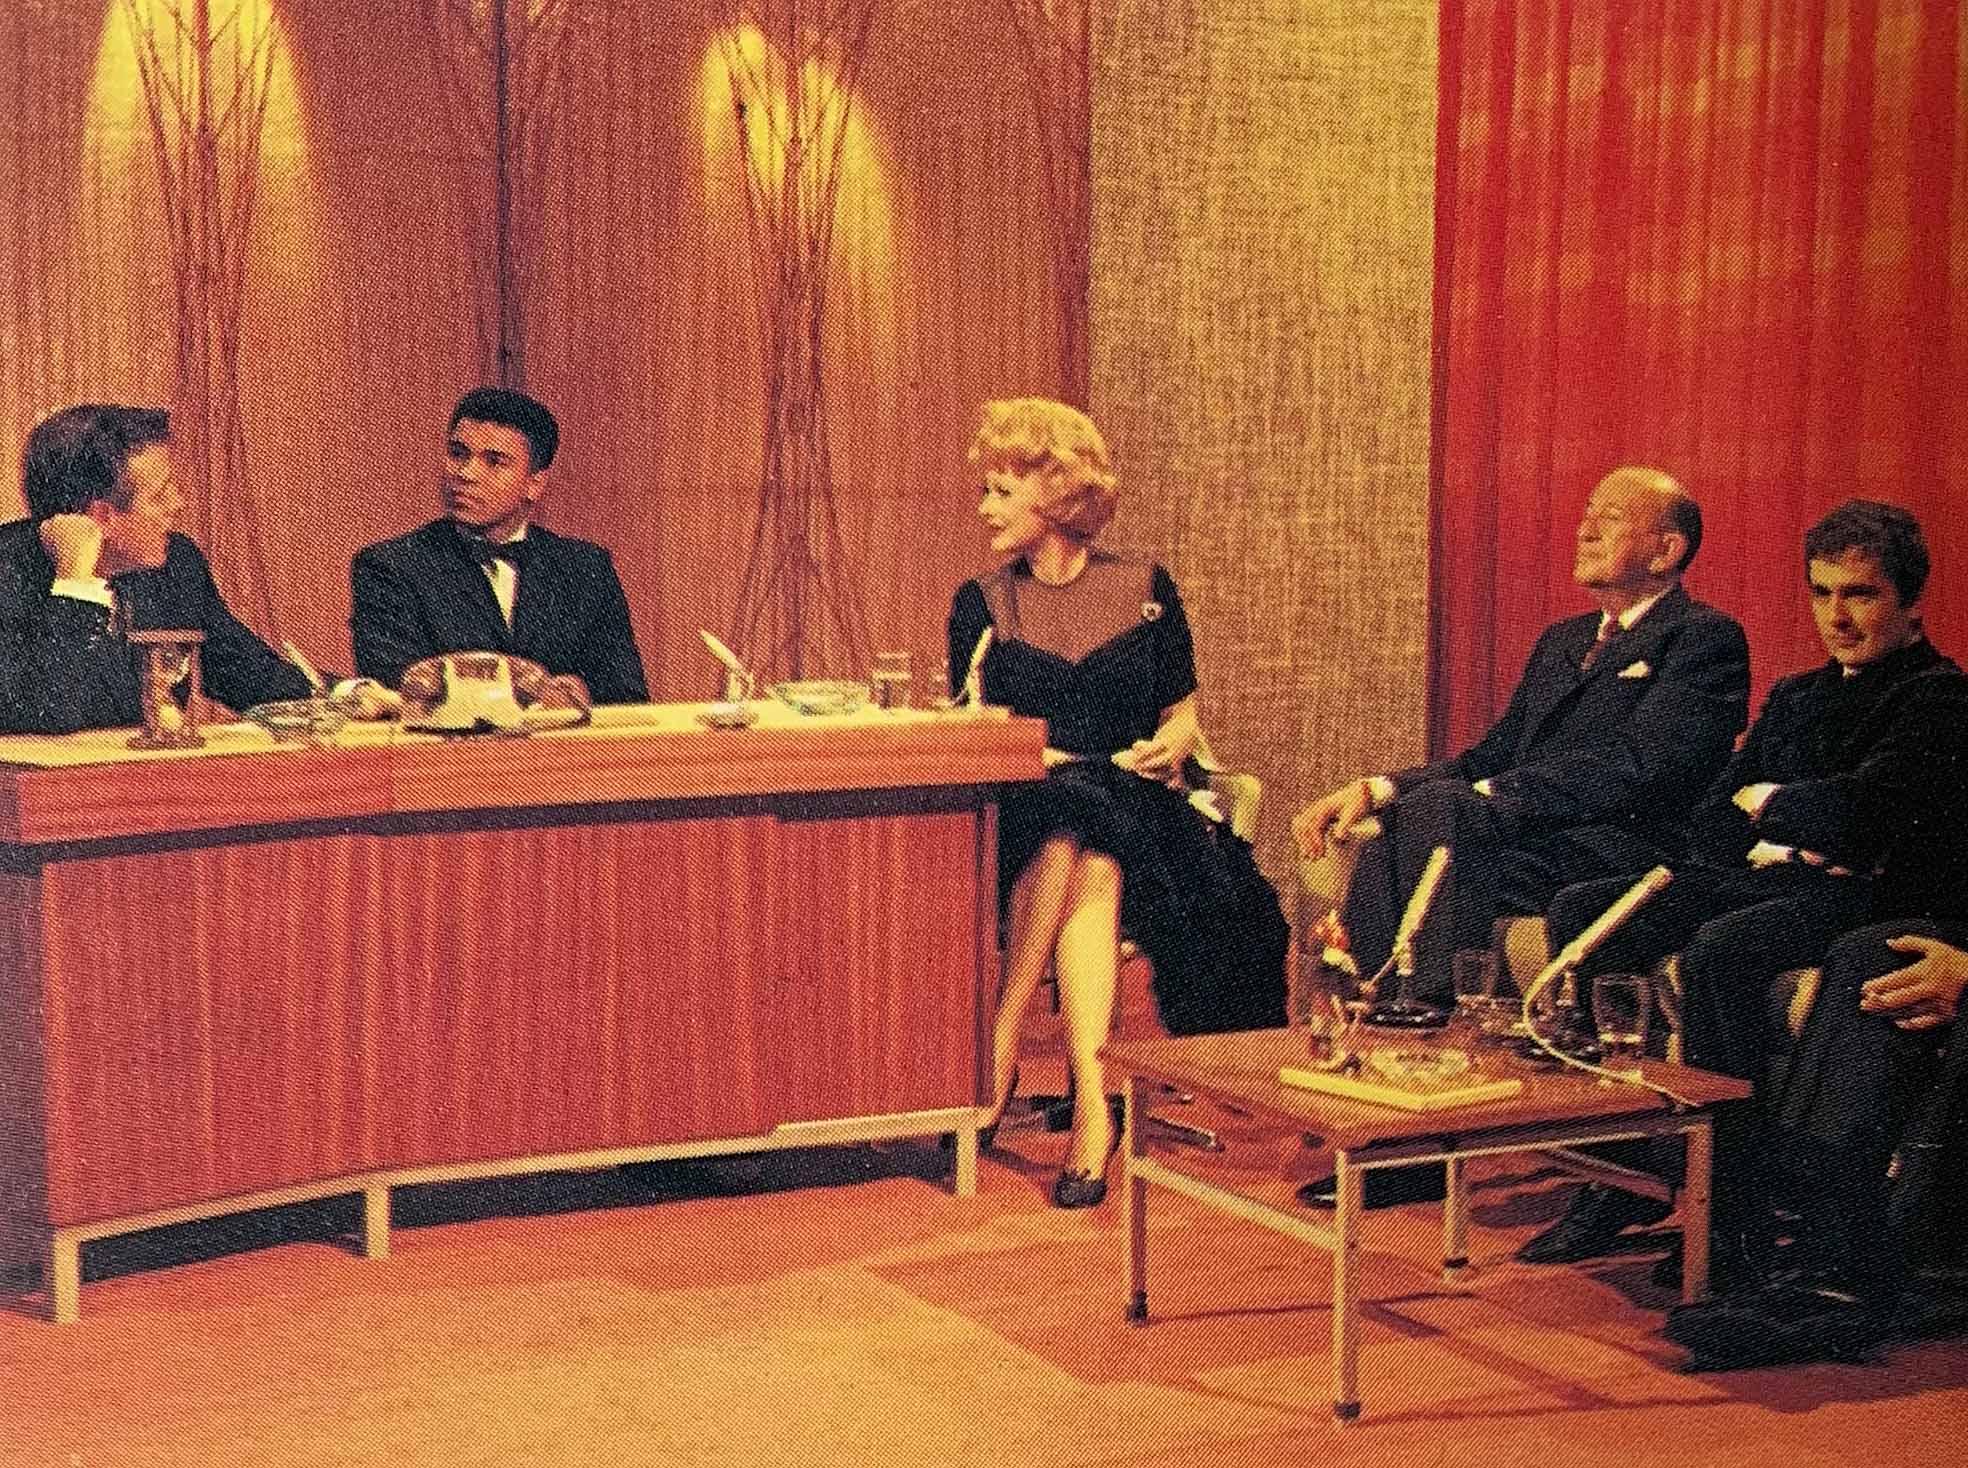 Eamonn Andrews, Muhammad Ali, Lucille Ball, Noel Coward and Dudley Moore